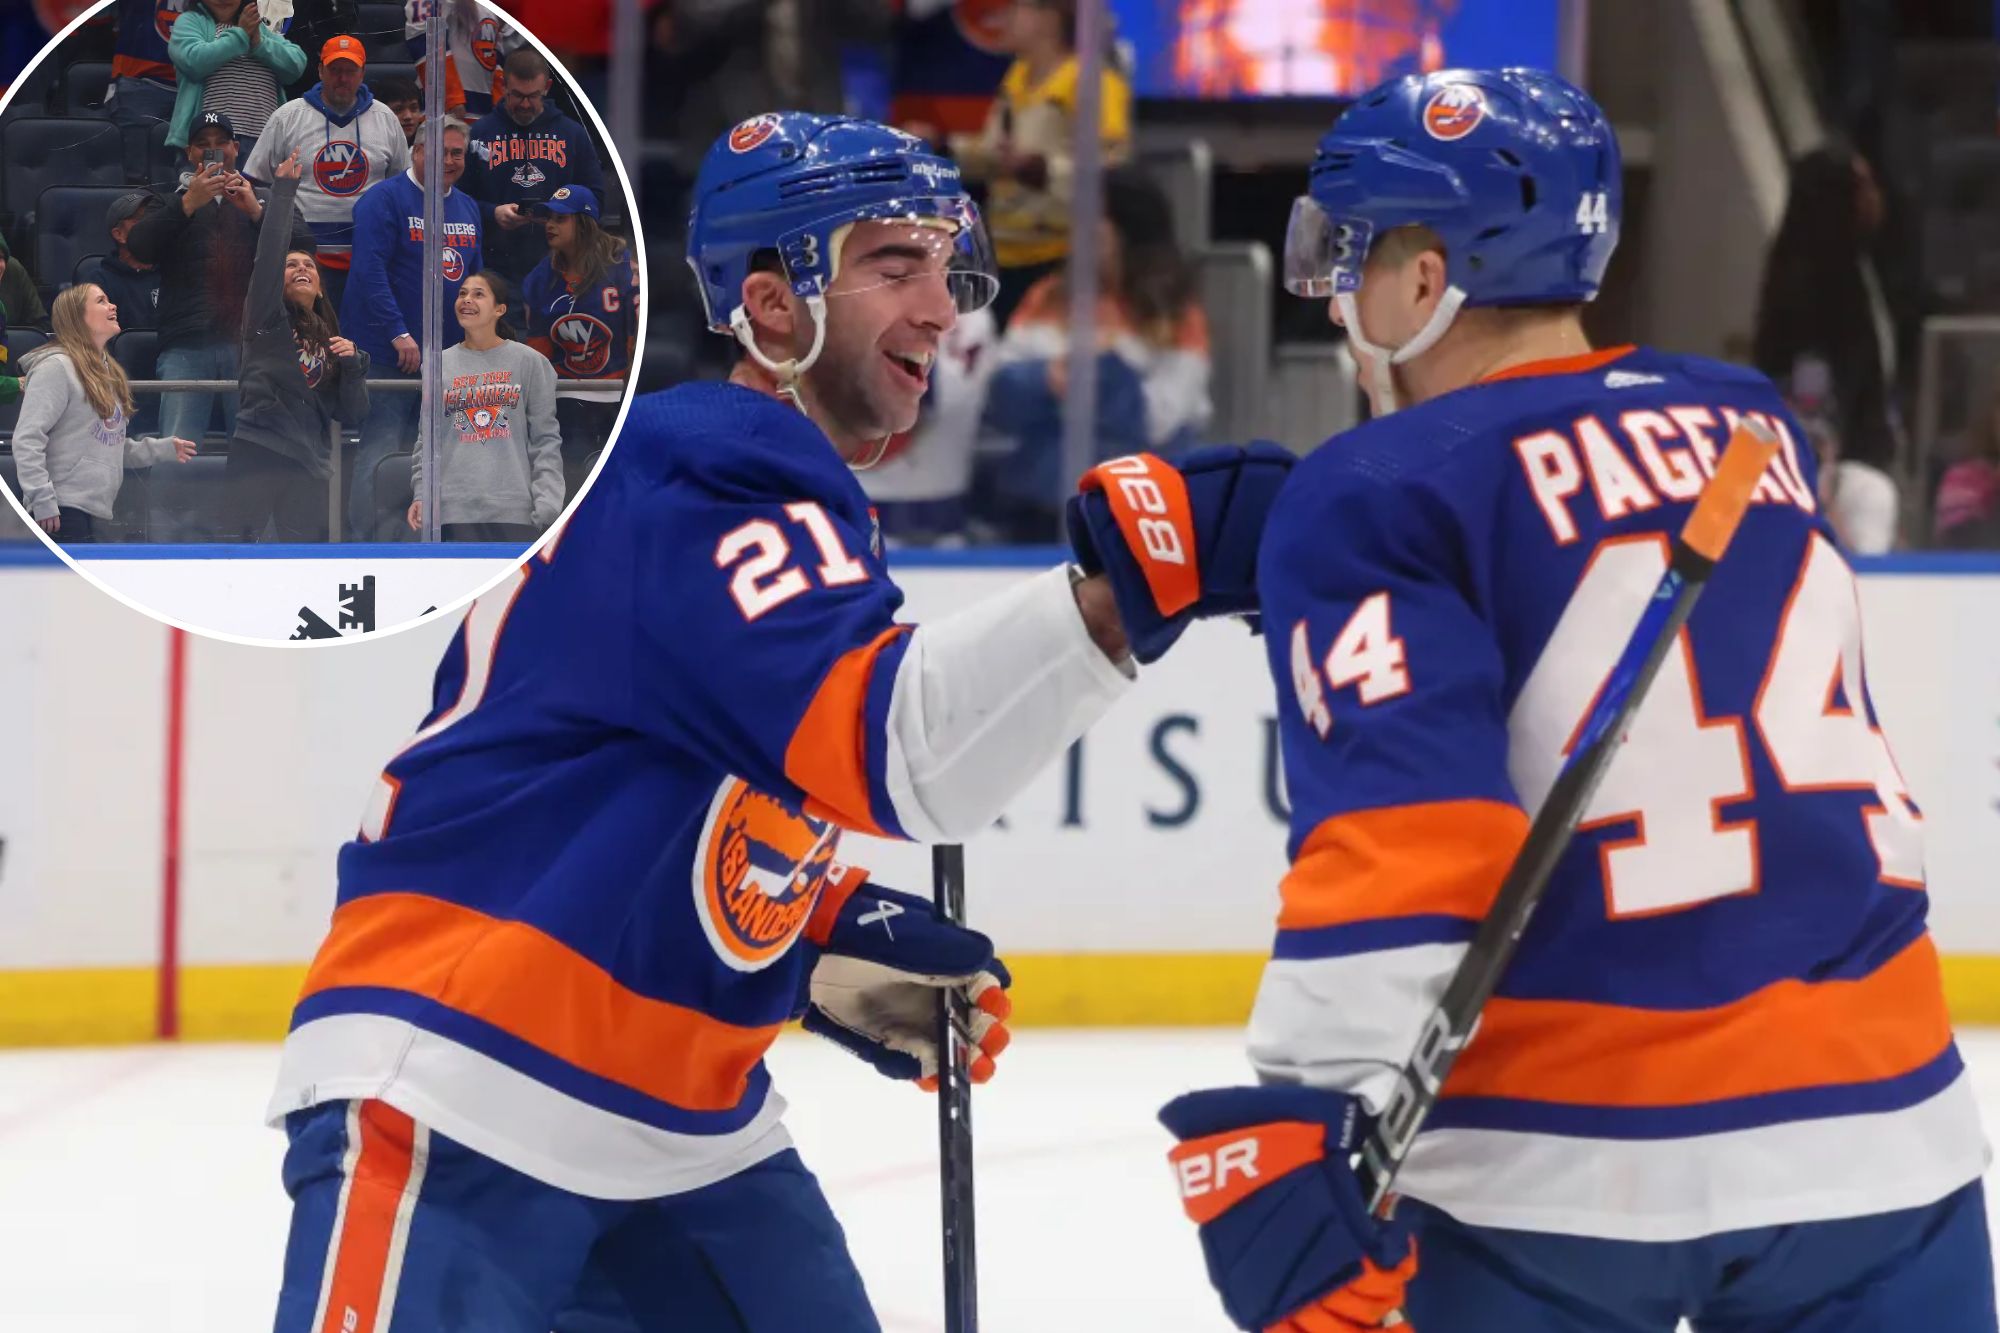 Kyle Palmieri (left) celebrates with Jean-Gabriel Pageau after completing a hat trick in the first period of the Islanders' game vs. the Bruins. A fan (inset) throw a hat in celebration of the feat.